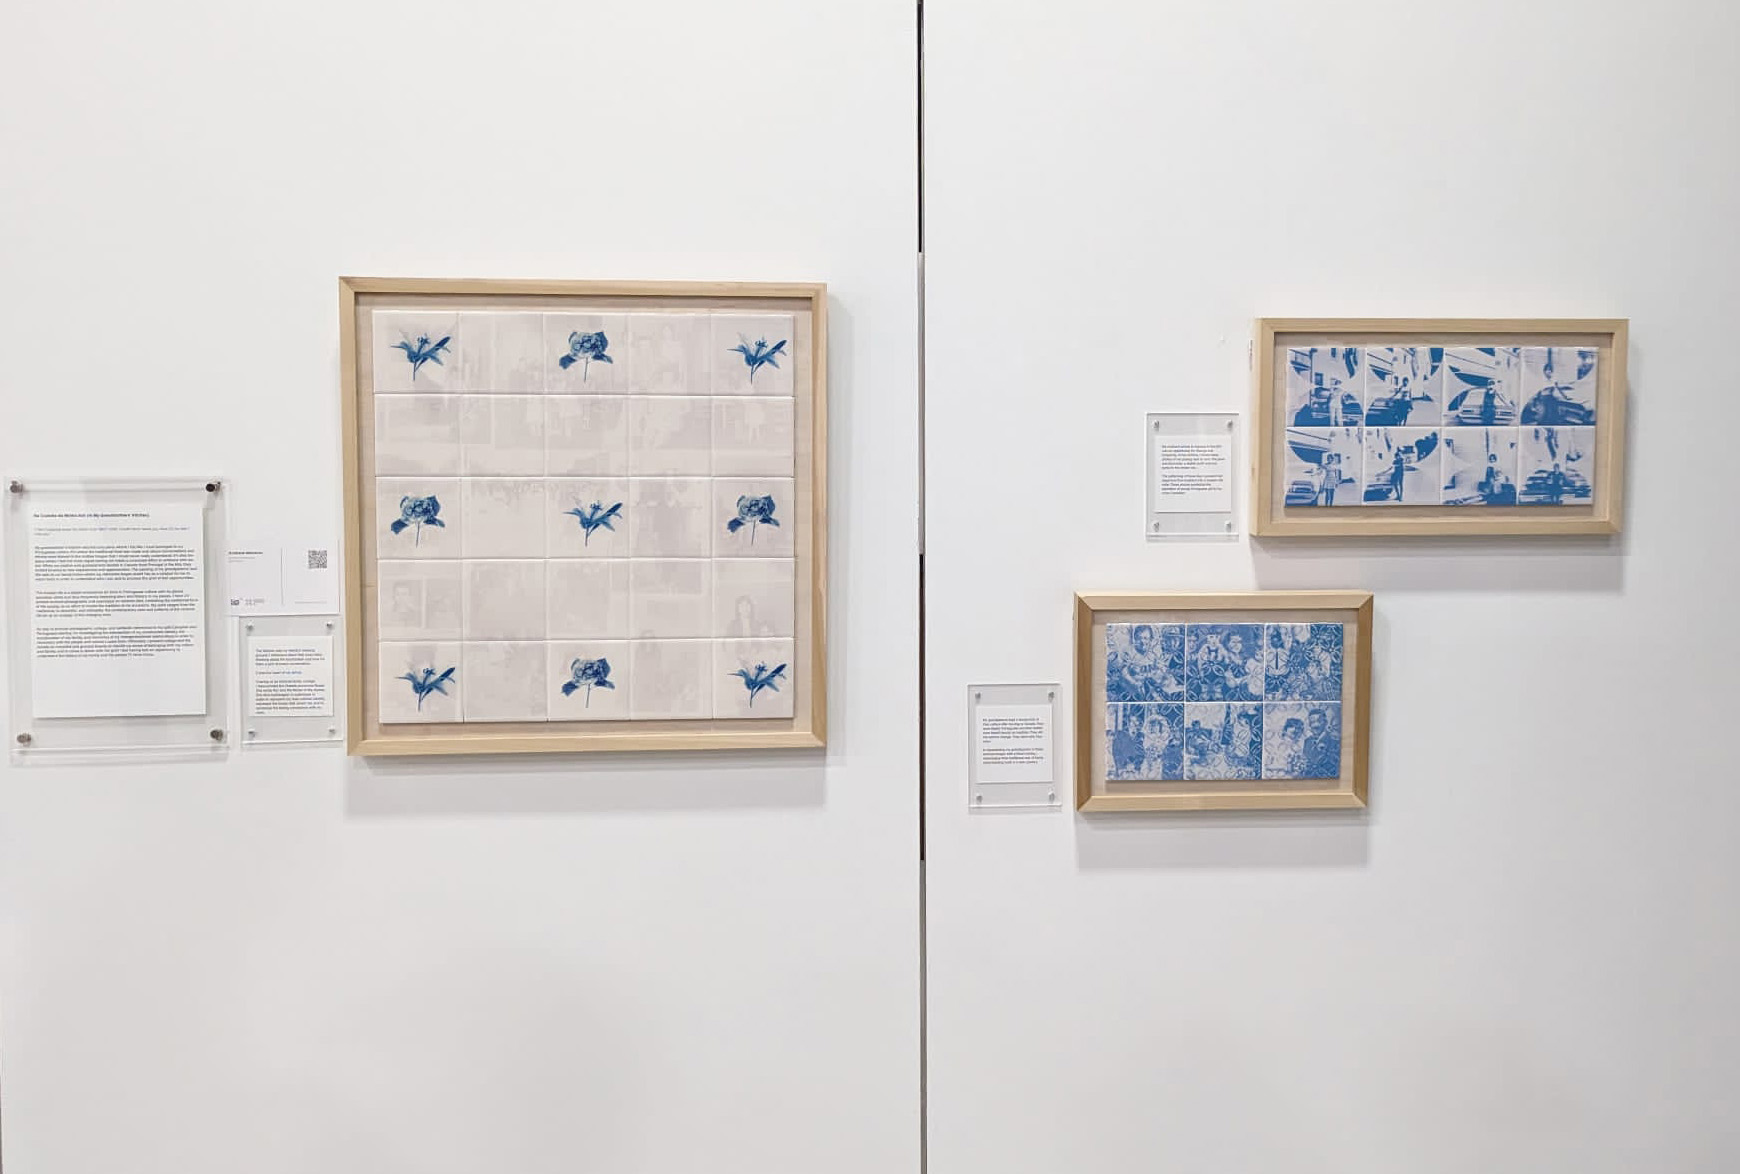 Framed grids of tiles in a gallery setting. Some tile have blue images printed on the surface.. Beside each frame are written descriptions. 